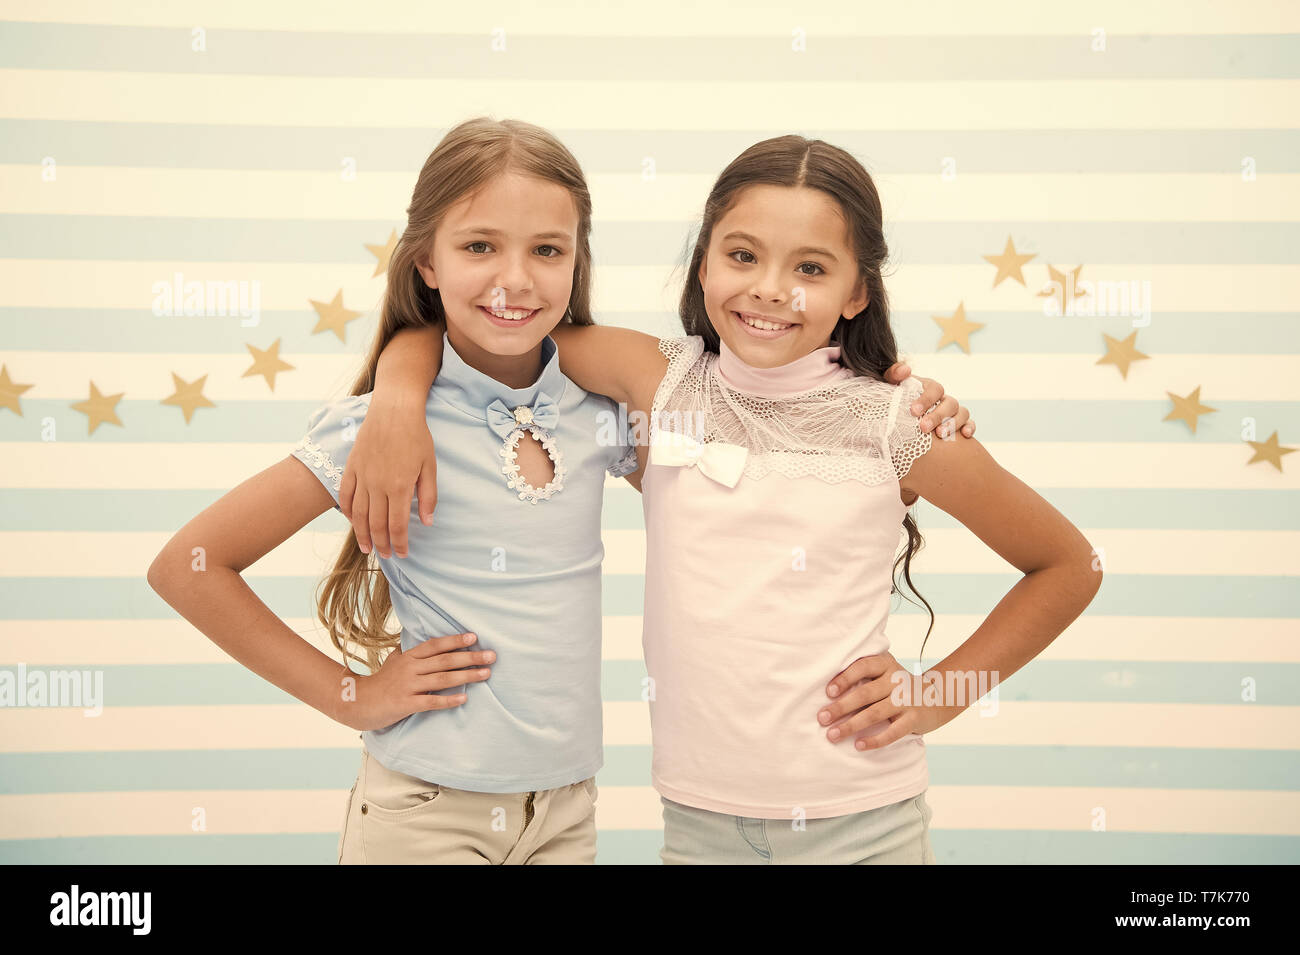 Happy childhood concept. Kids schoolgirls preteens happy together. Friendship from childhood. Girls smiling happy faces hug each other while stand striped background. Girls children best friends hugs. Stock Photo